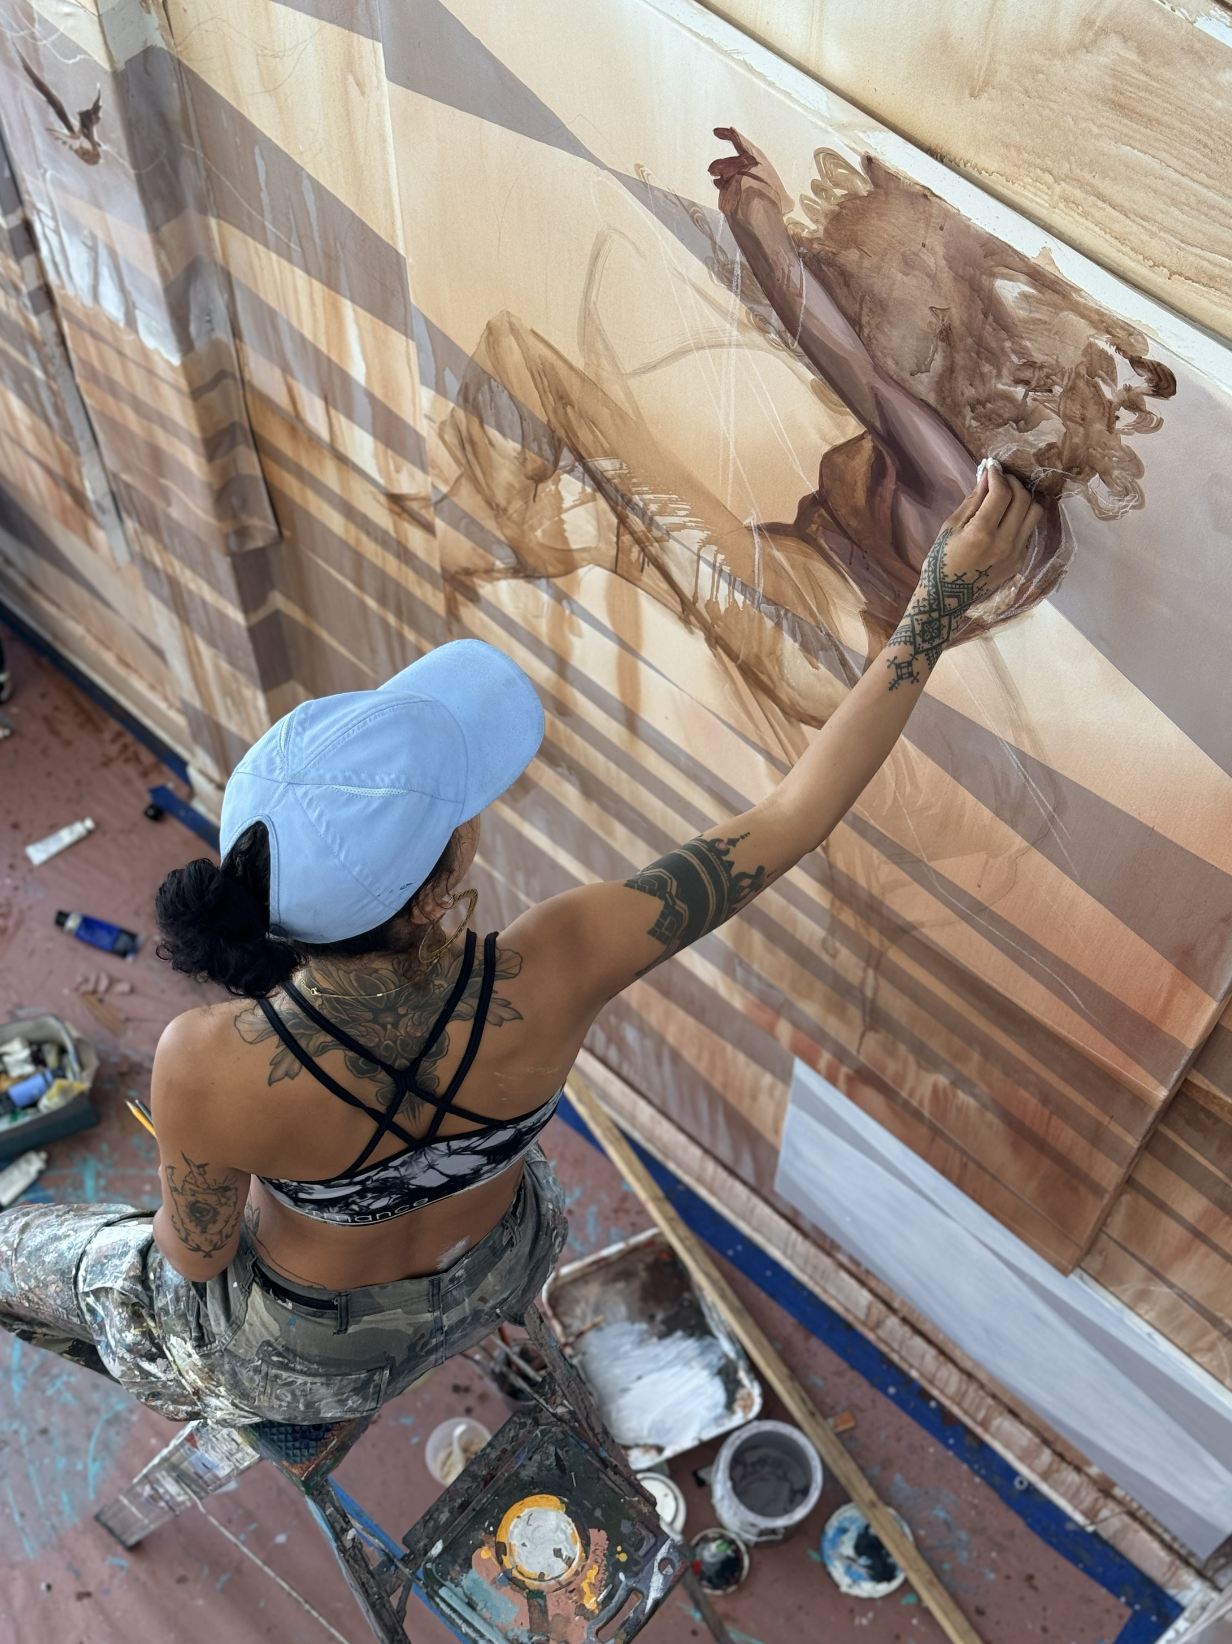 Woman with blue hat on paints a brown and gold image on a canvas.